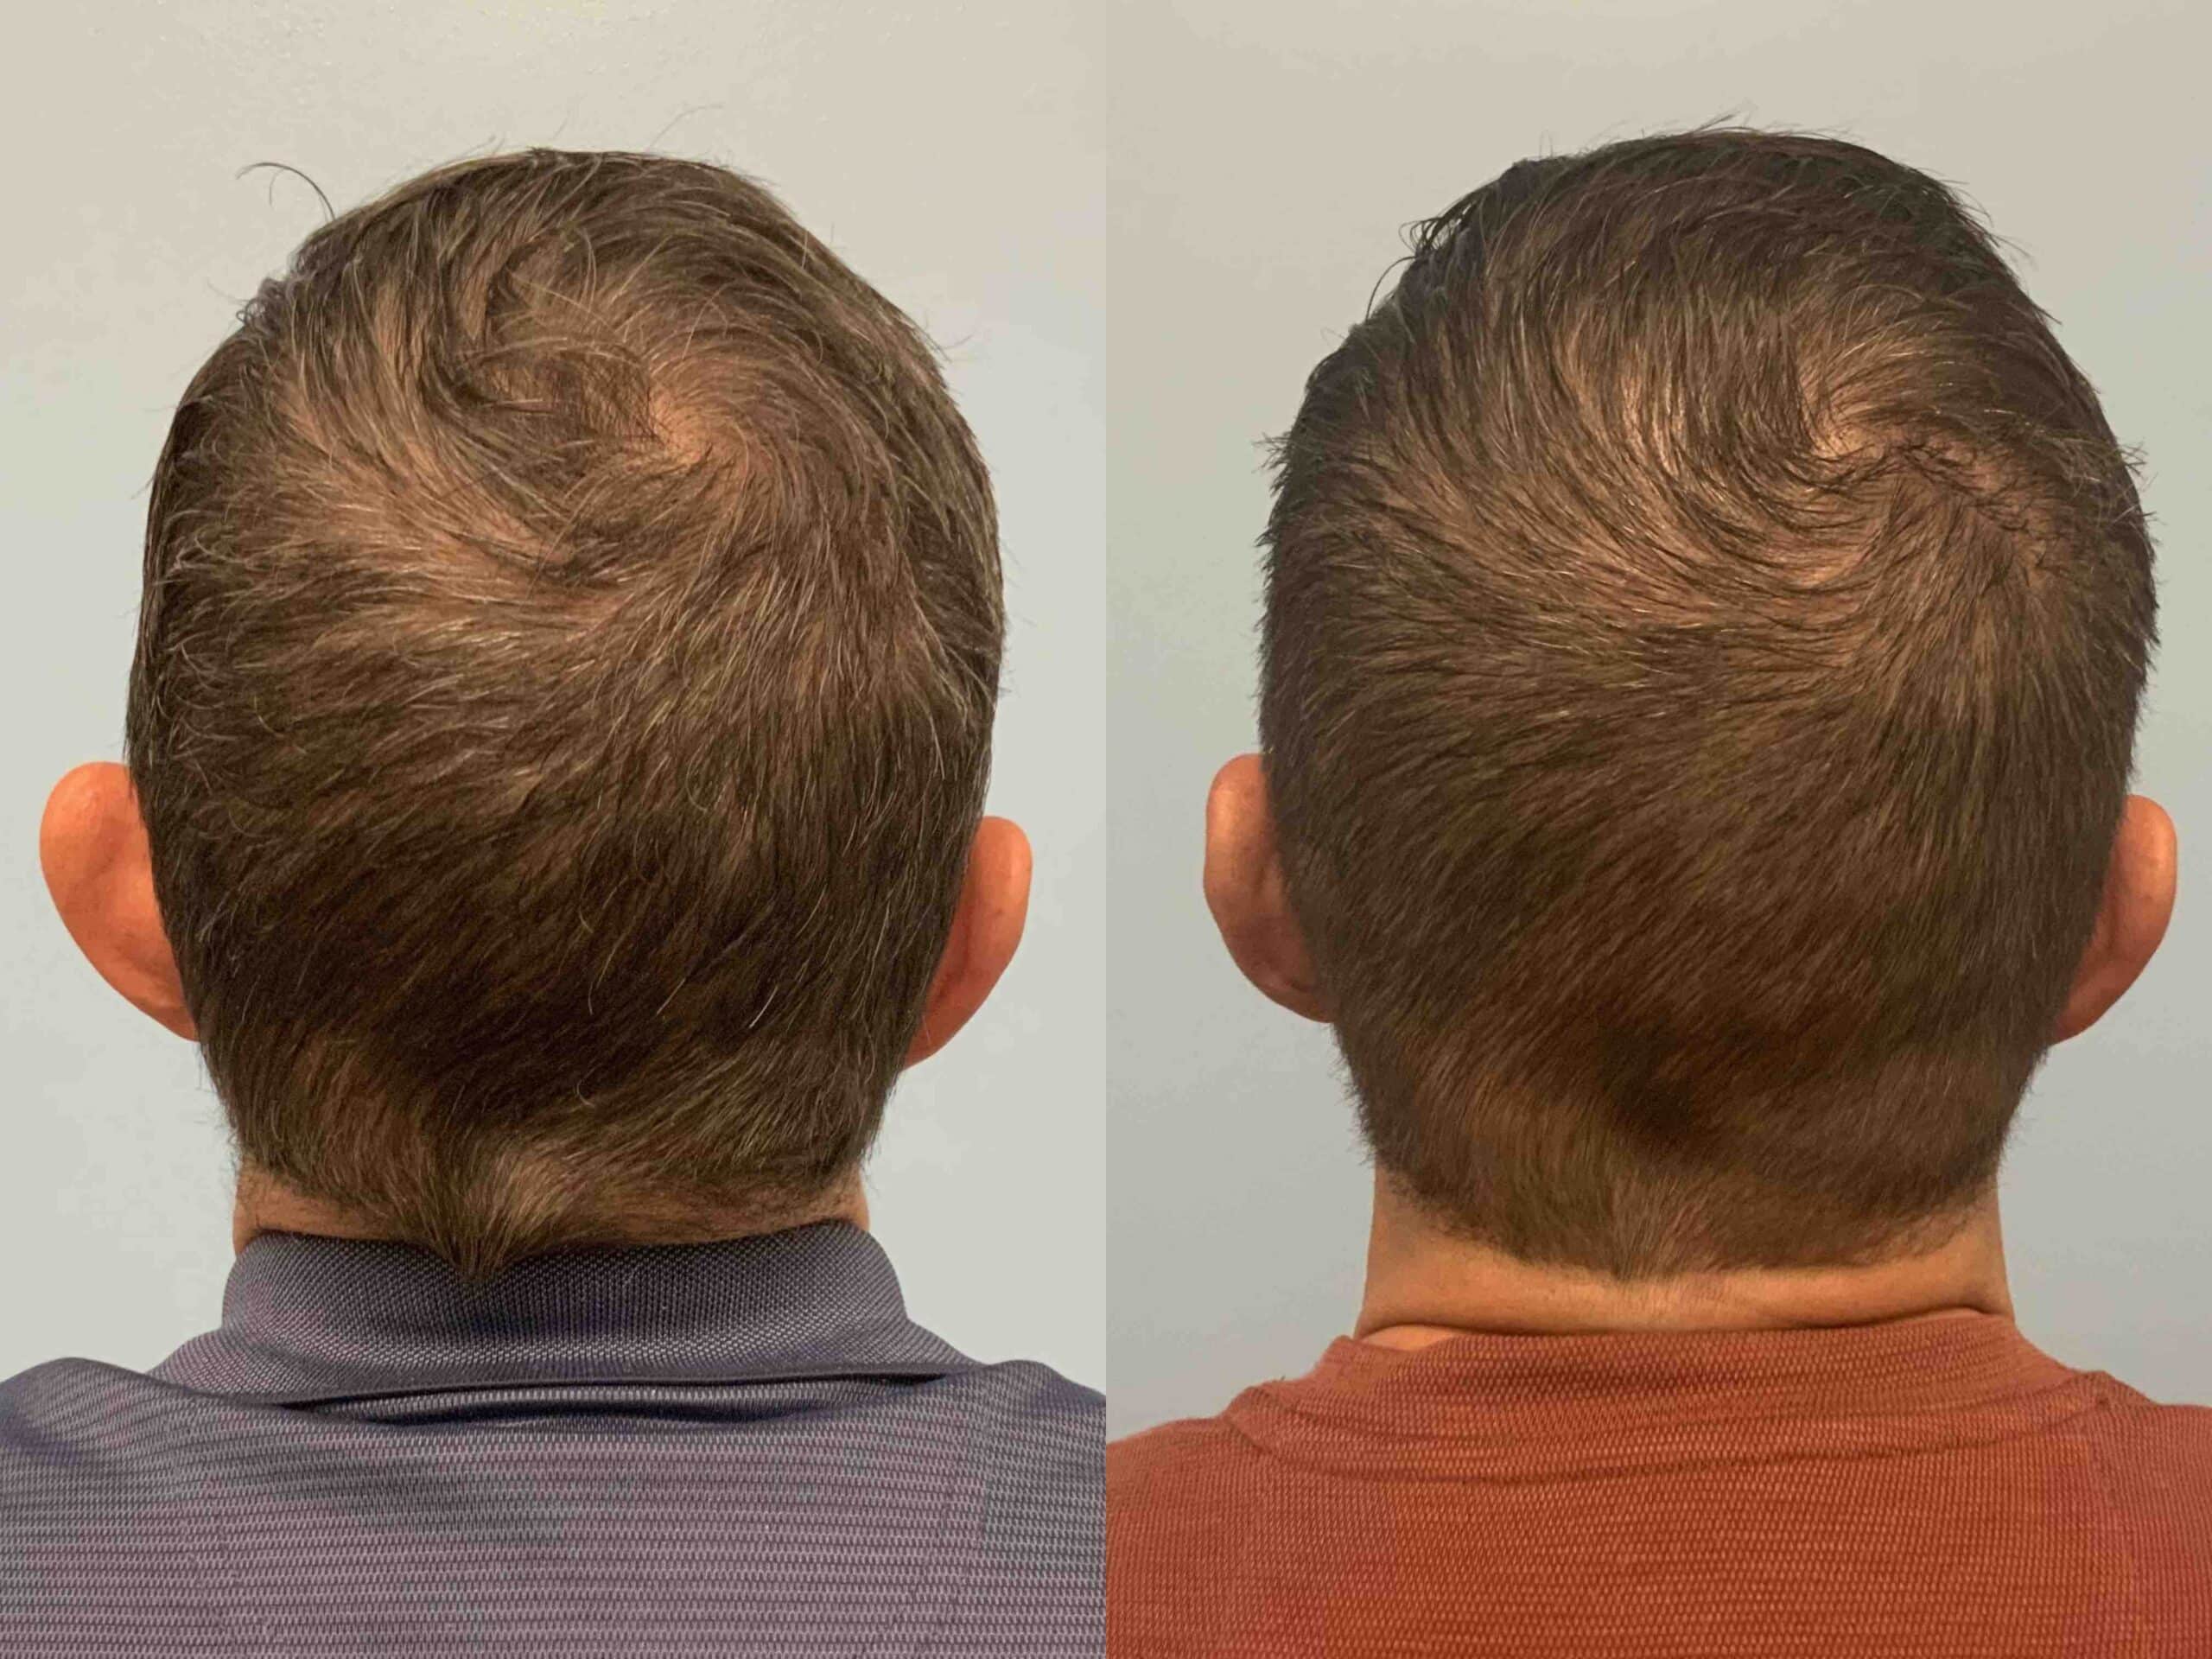 Before and after, 3 mo post op from left ear otoplasty performed by Dr. Paul Vanek (back view)